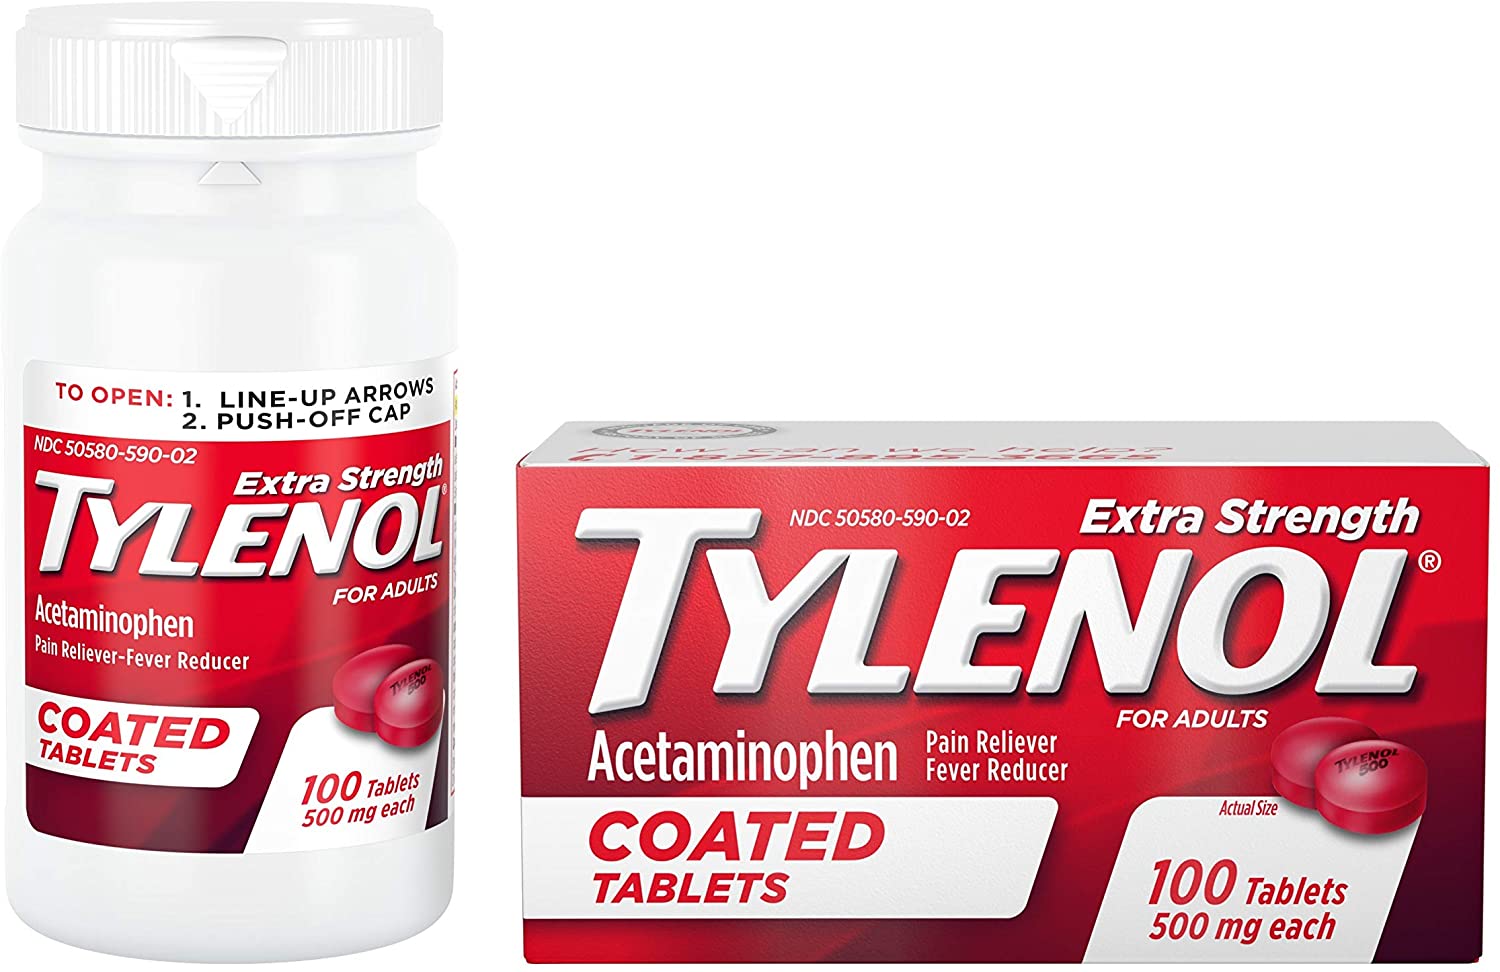 Tylenol Extra Strength Coated Tablets - 100 Tablet